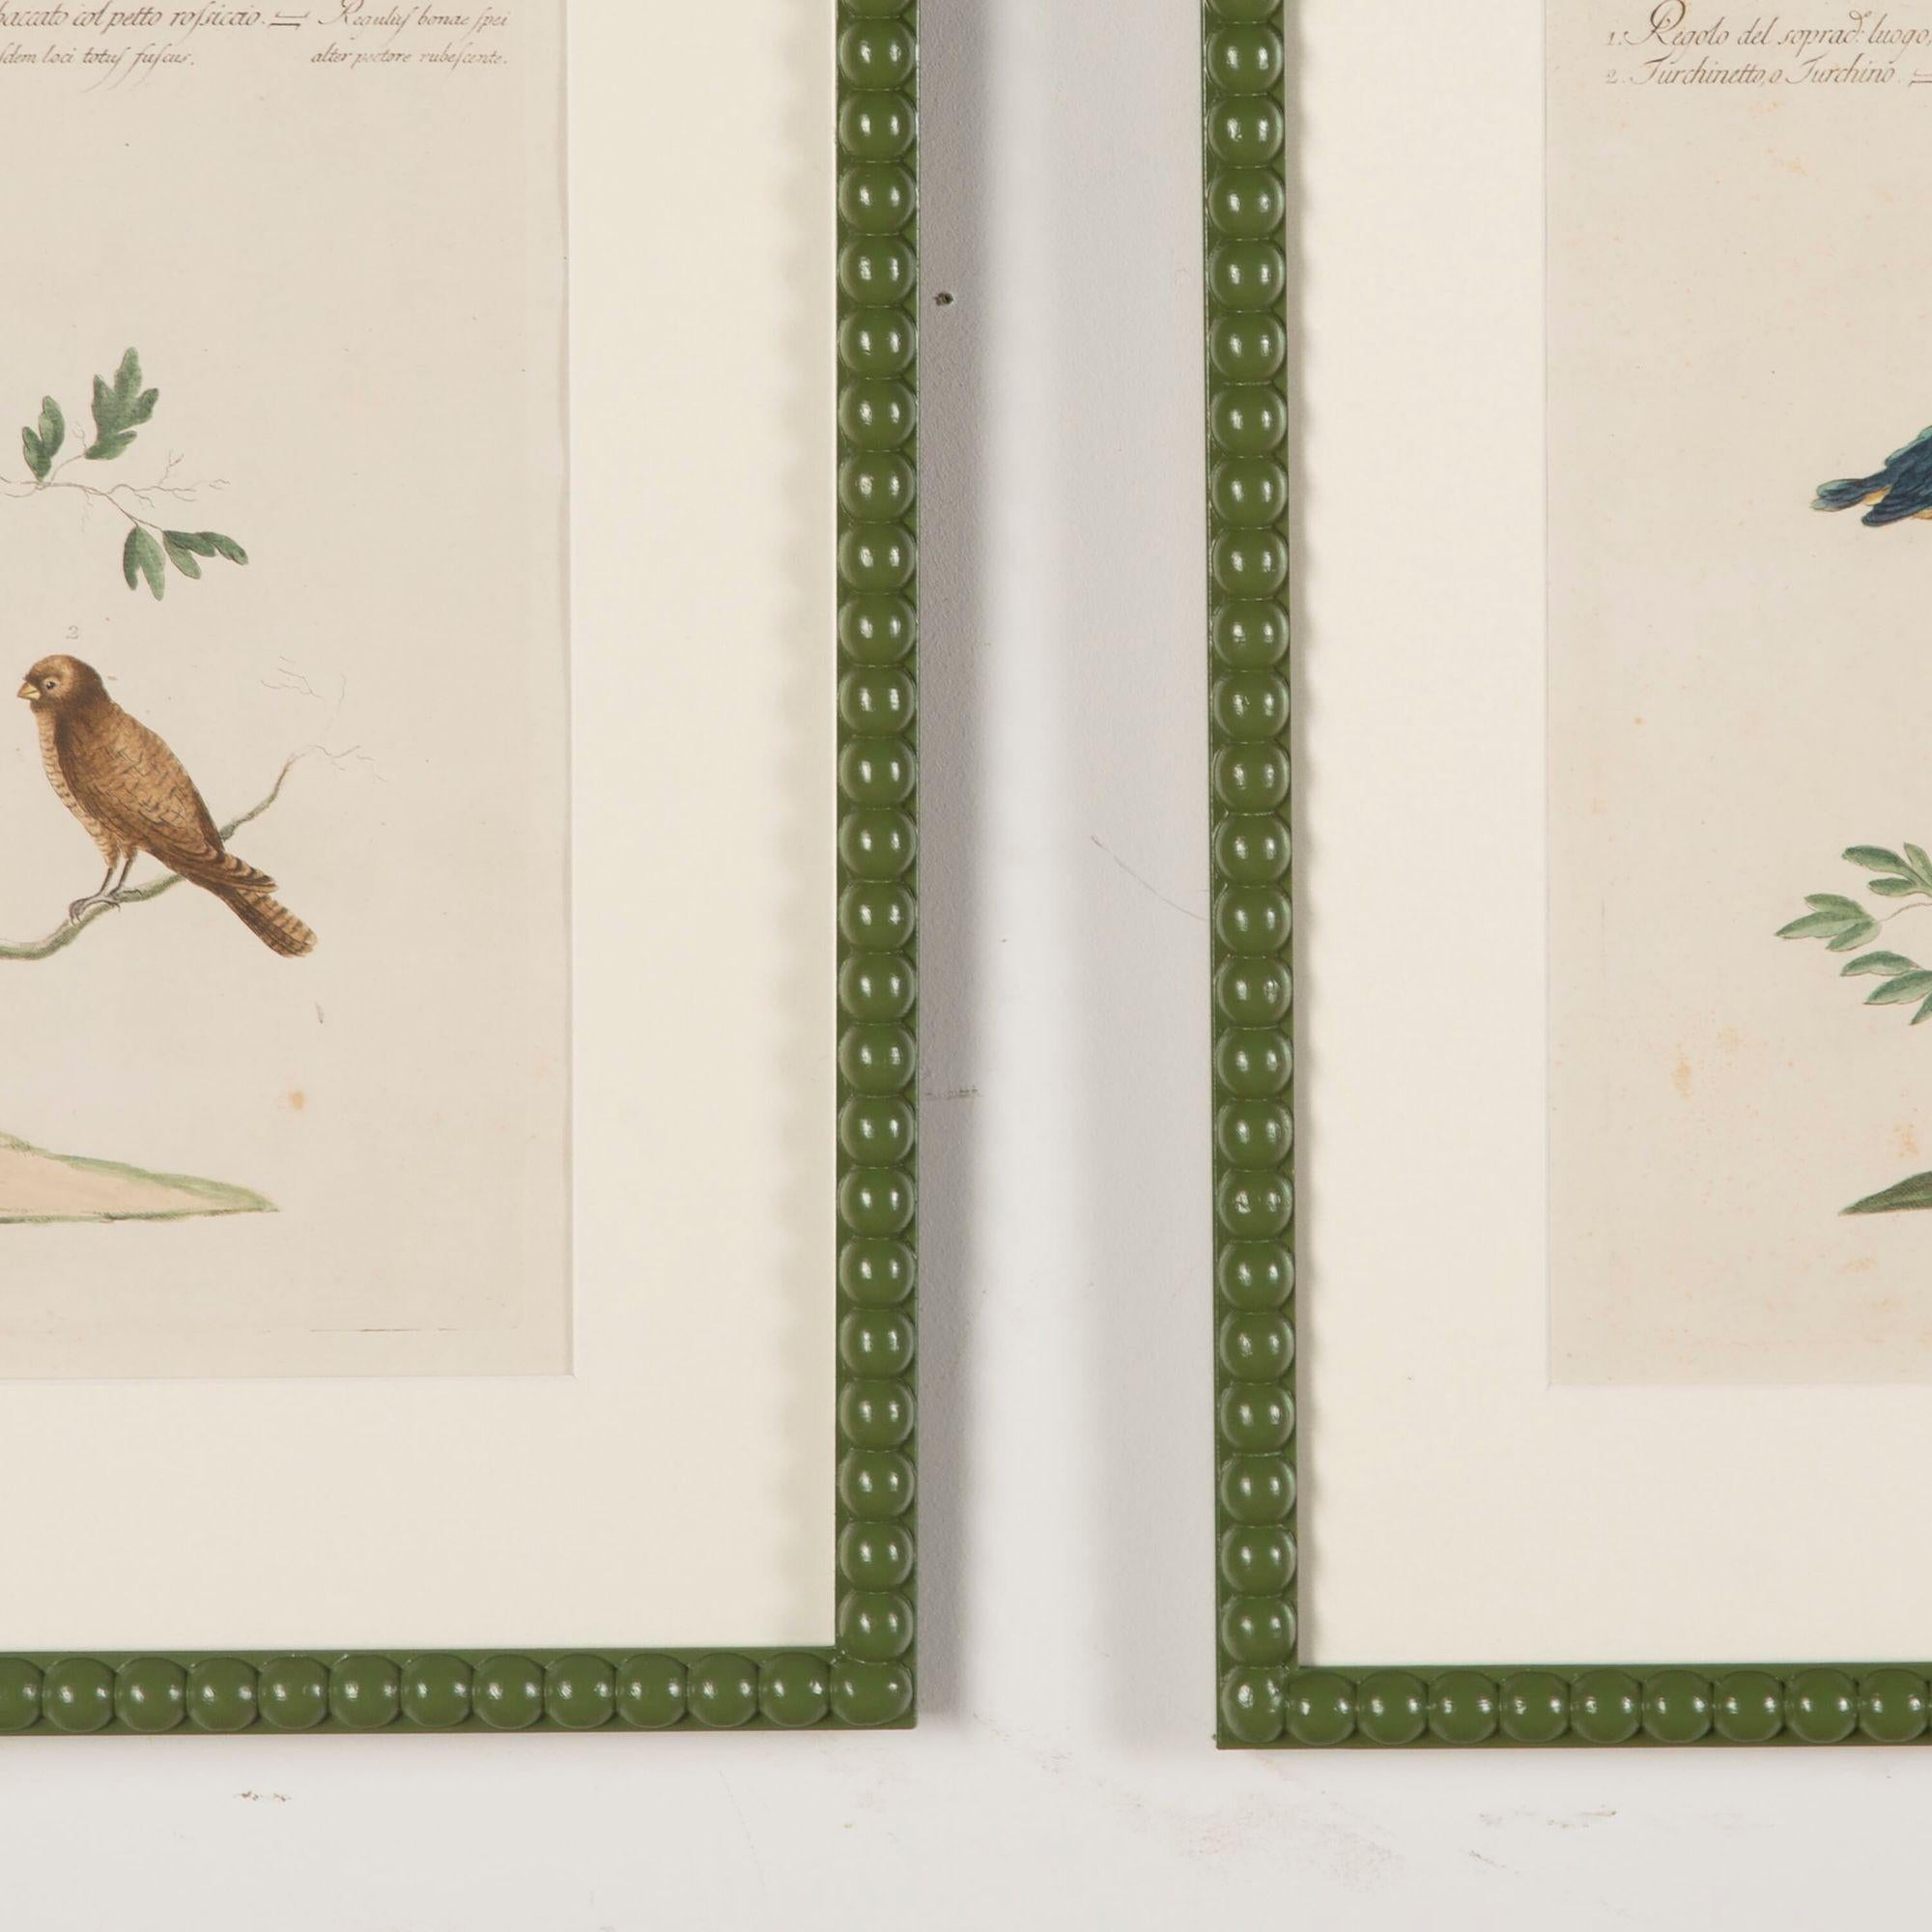 18th century Saverio Manetti hand-coloured bird engravings.
Presented in bespoke hand-painted and lacquered bobbin frames with hessian mounts and Ar70 Artglass for optimal clarity.
These engravings originate from ‘Storia naturale degli Uccelli’ by